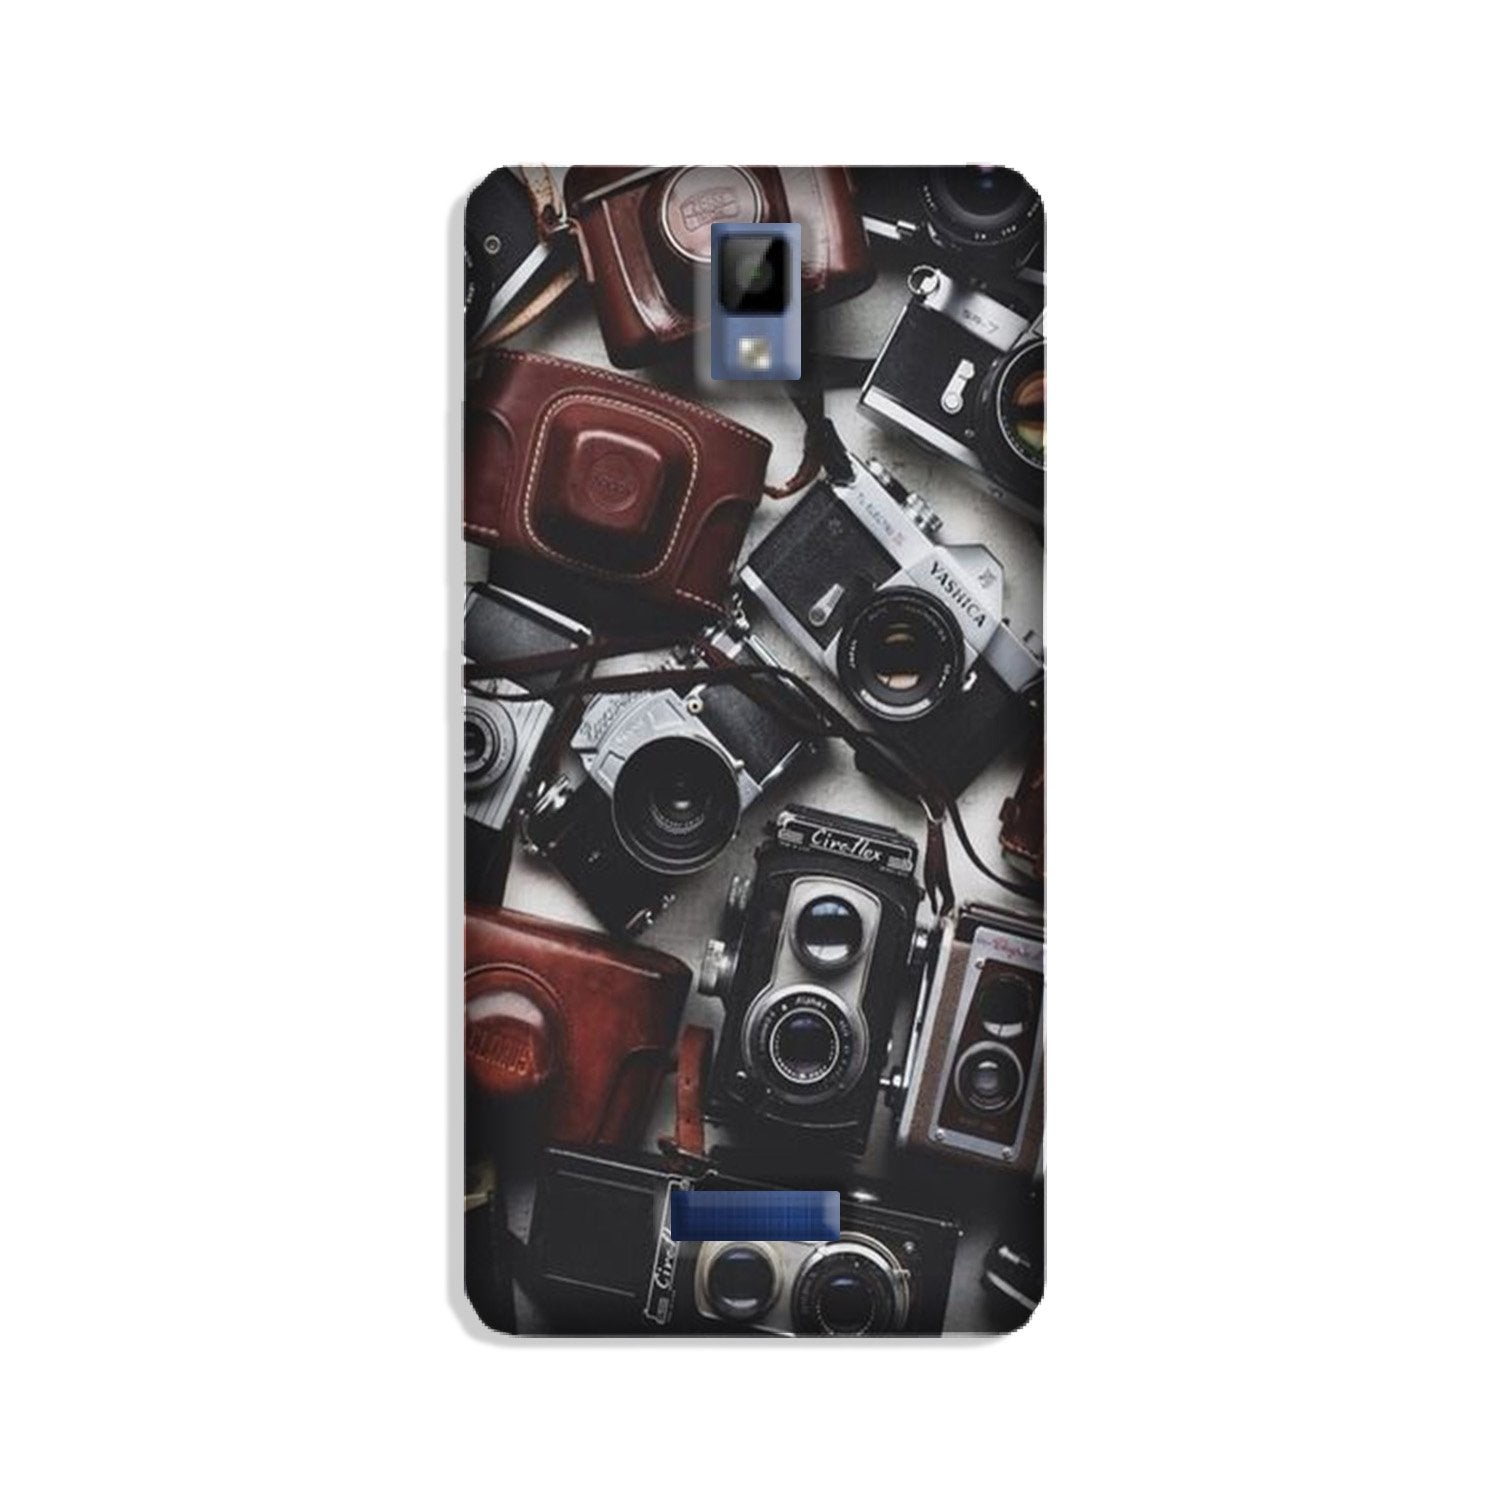 Cameras Case for Gionee P7